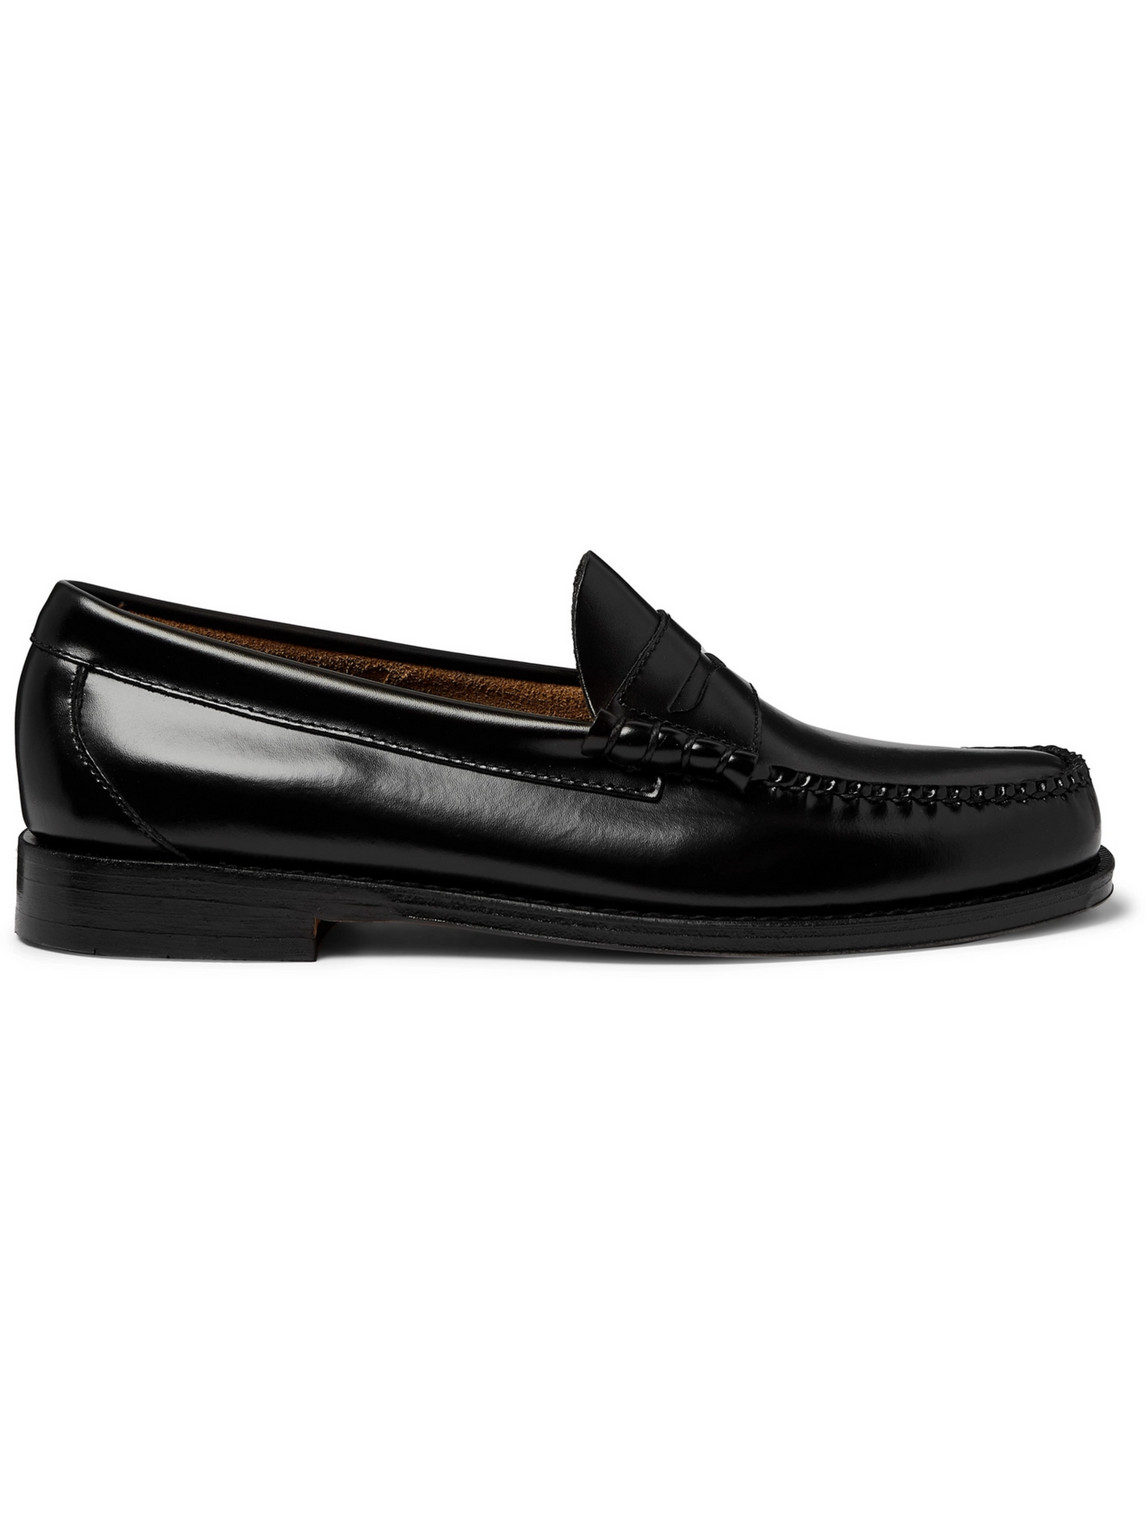 G.H. Bass & Co. - Weejuns Heritage Larson Leather Penny Loafers - Men - Black - UK 7.5 von G.H. Bass & Co.